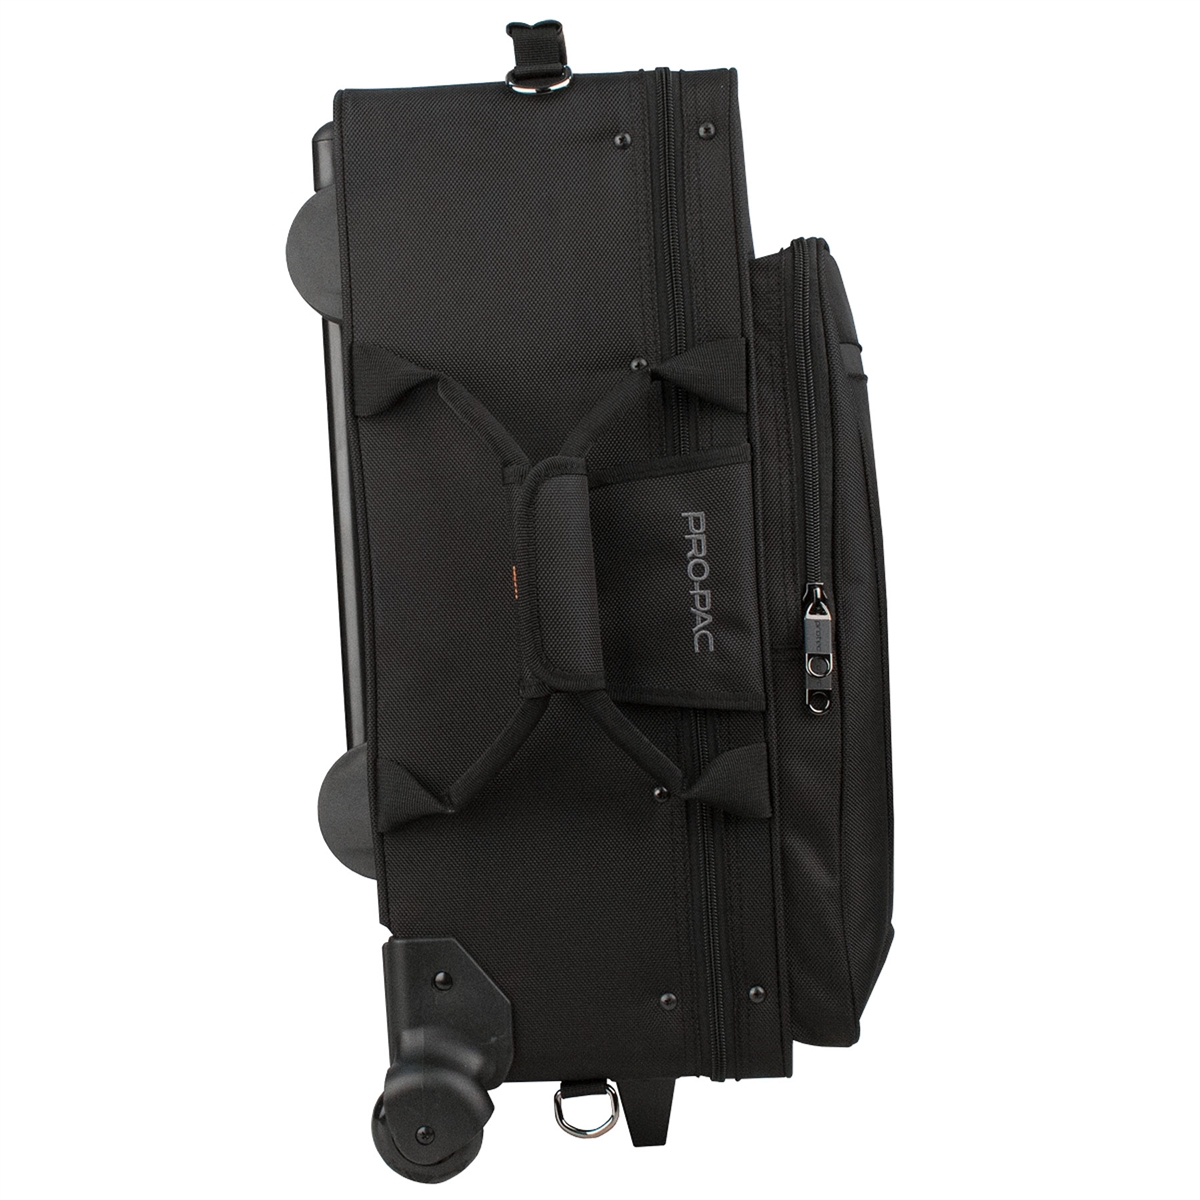 Protec PB301VAX Trolley-Case for Trumpet and Flugelhorn